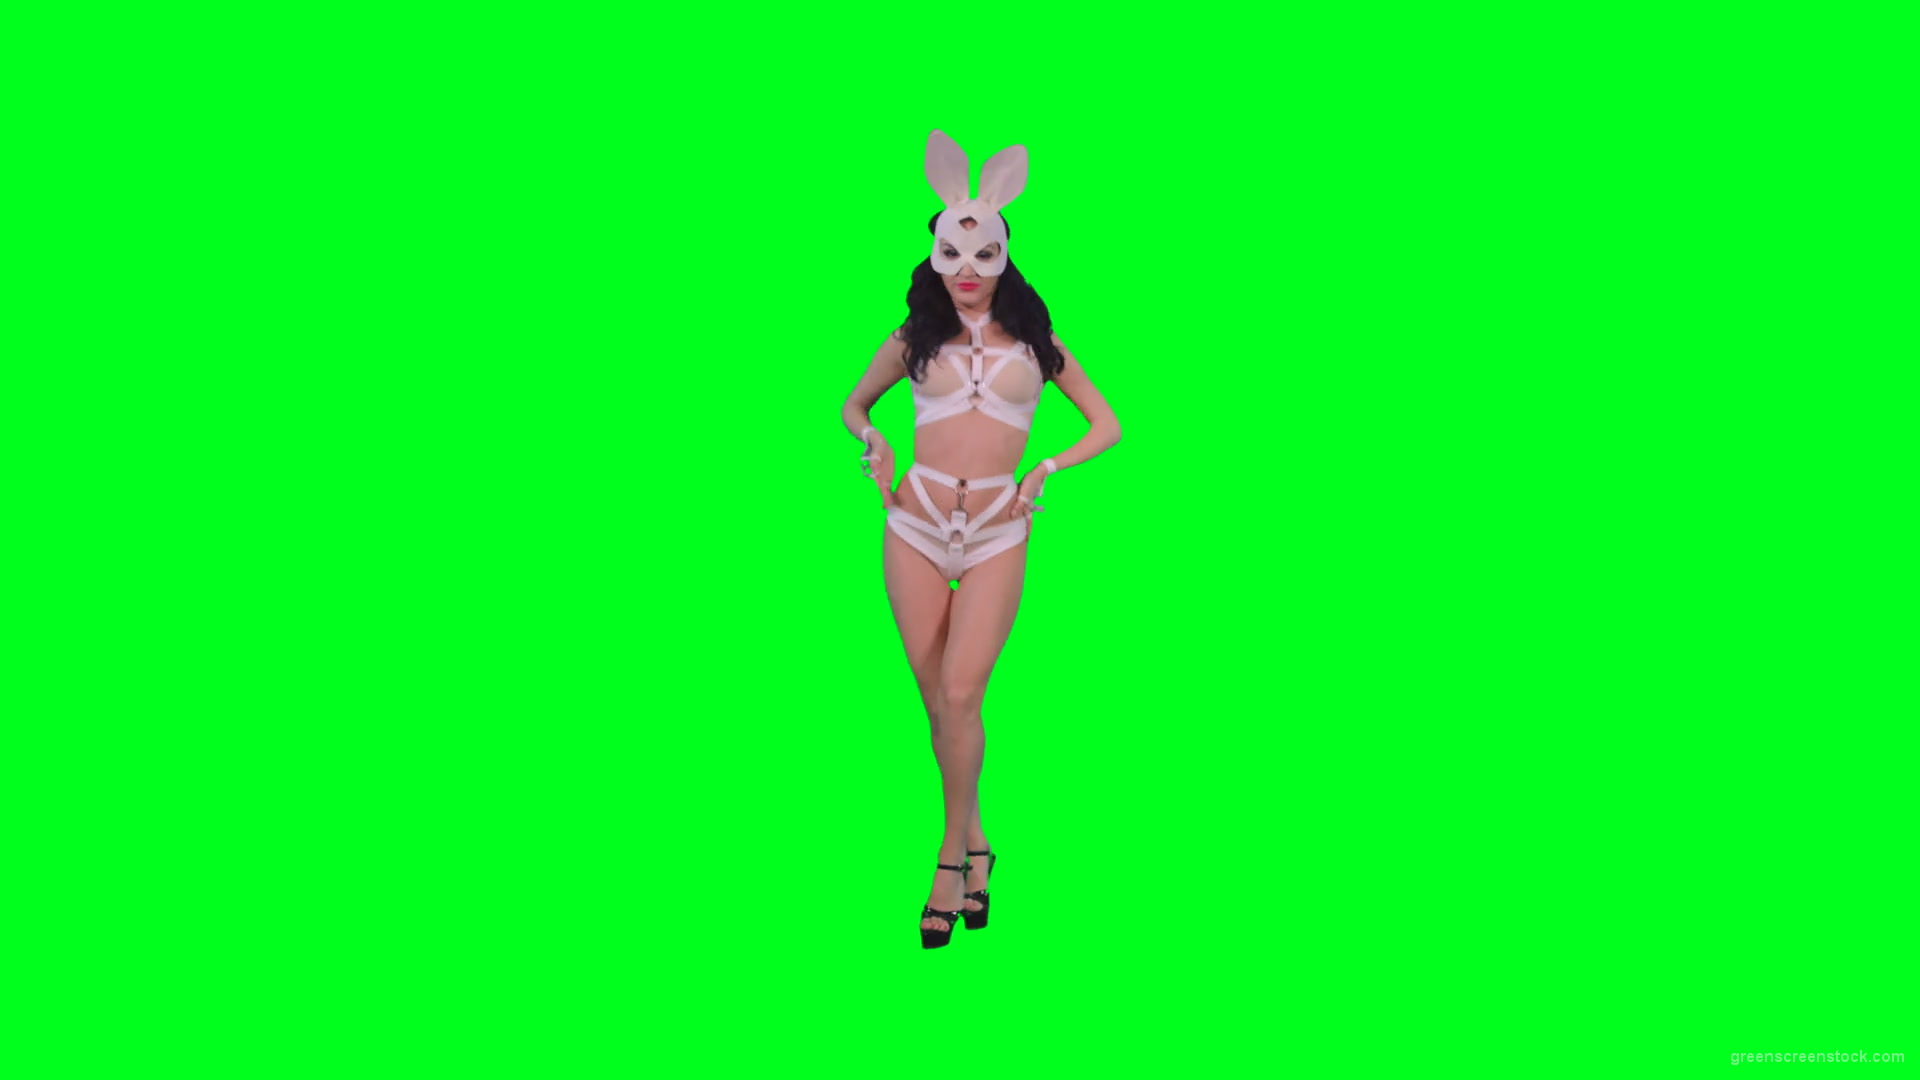 Black-hair-sexy-girl-in-playboy-costume-dancing-go-go-on-green-screen-4K-Video-Footage-1920_004 Green Screen Stock